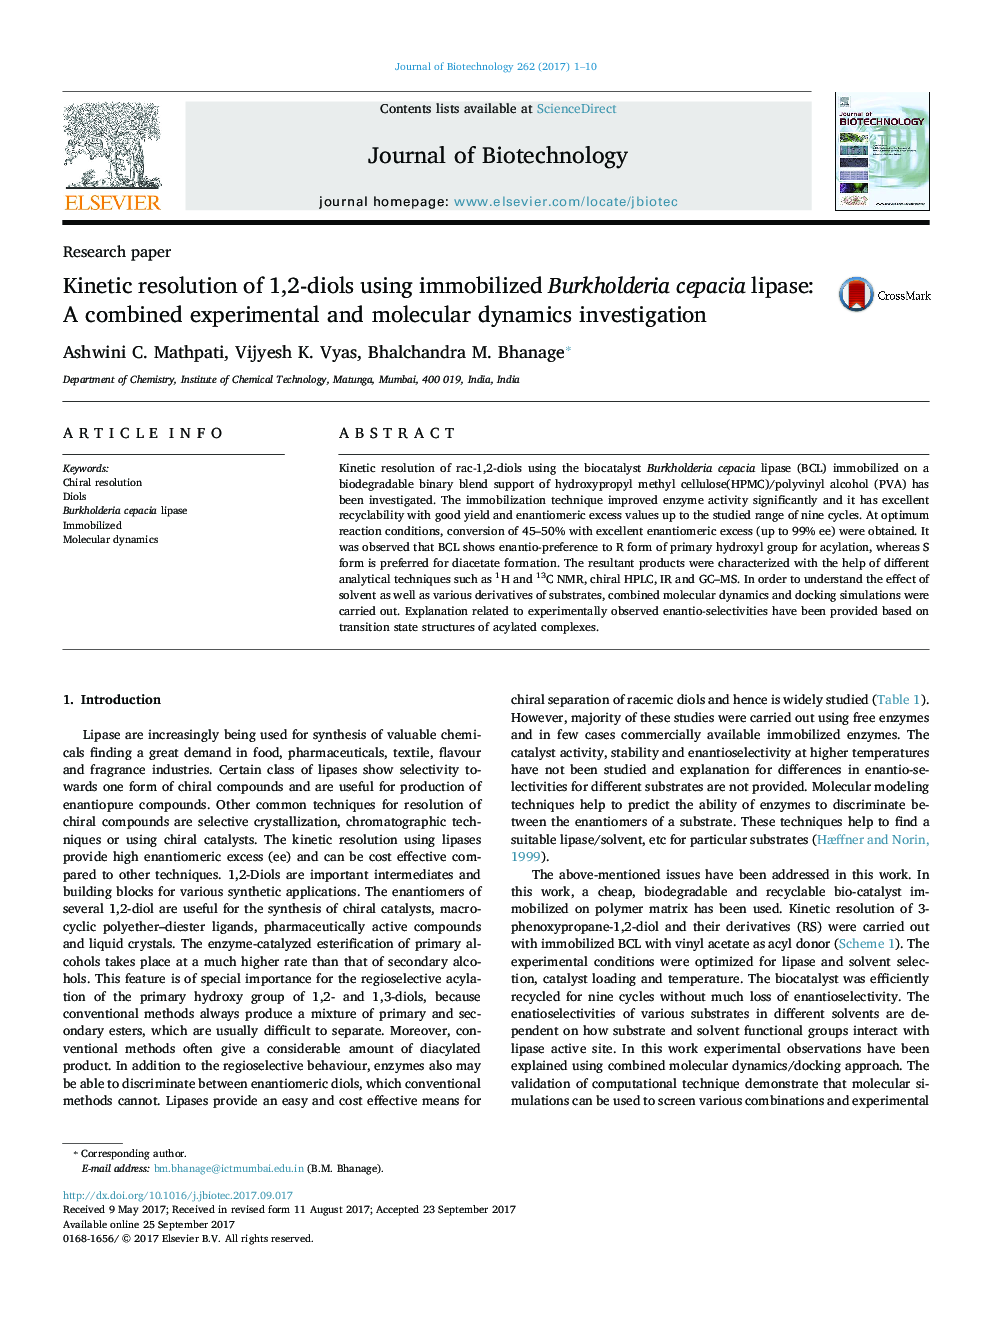 Research paperKinetic resolution of 1,2-diols using immobilized Burkholderia cepacia lipase: A combined experimental and molecular dynamics investigation